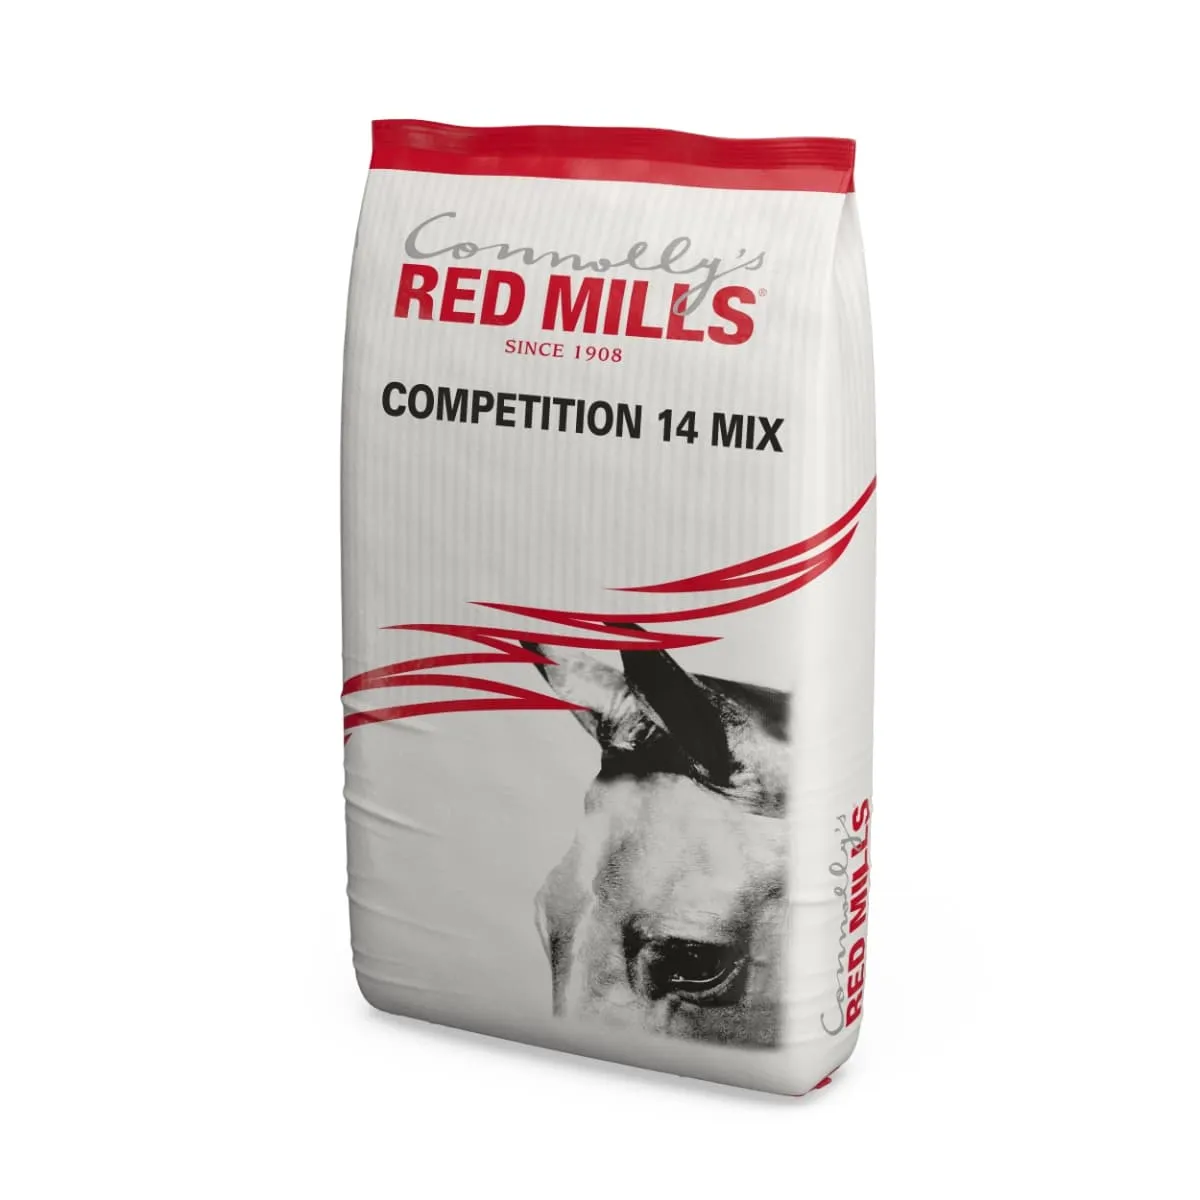 RED MILLS Competition 14 Mix